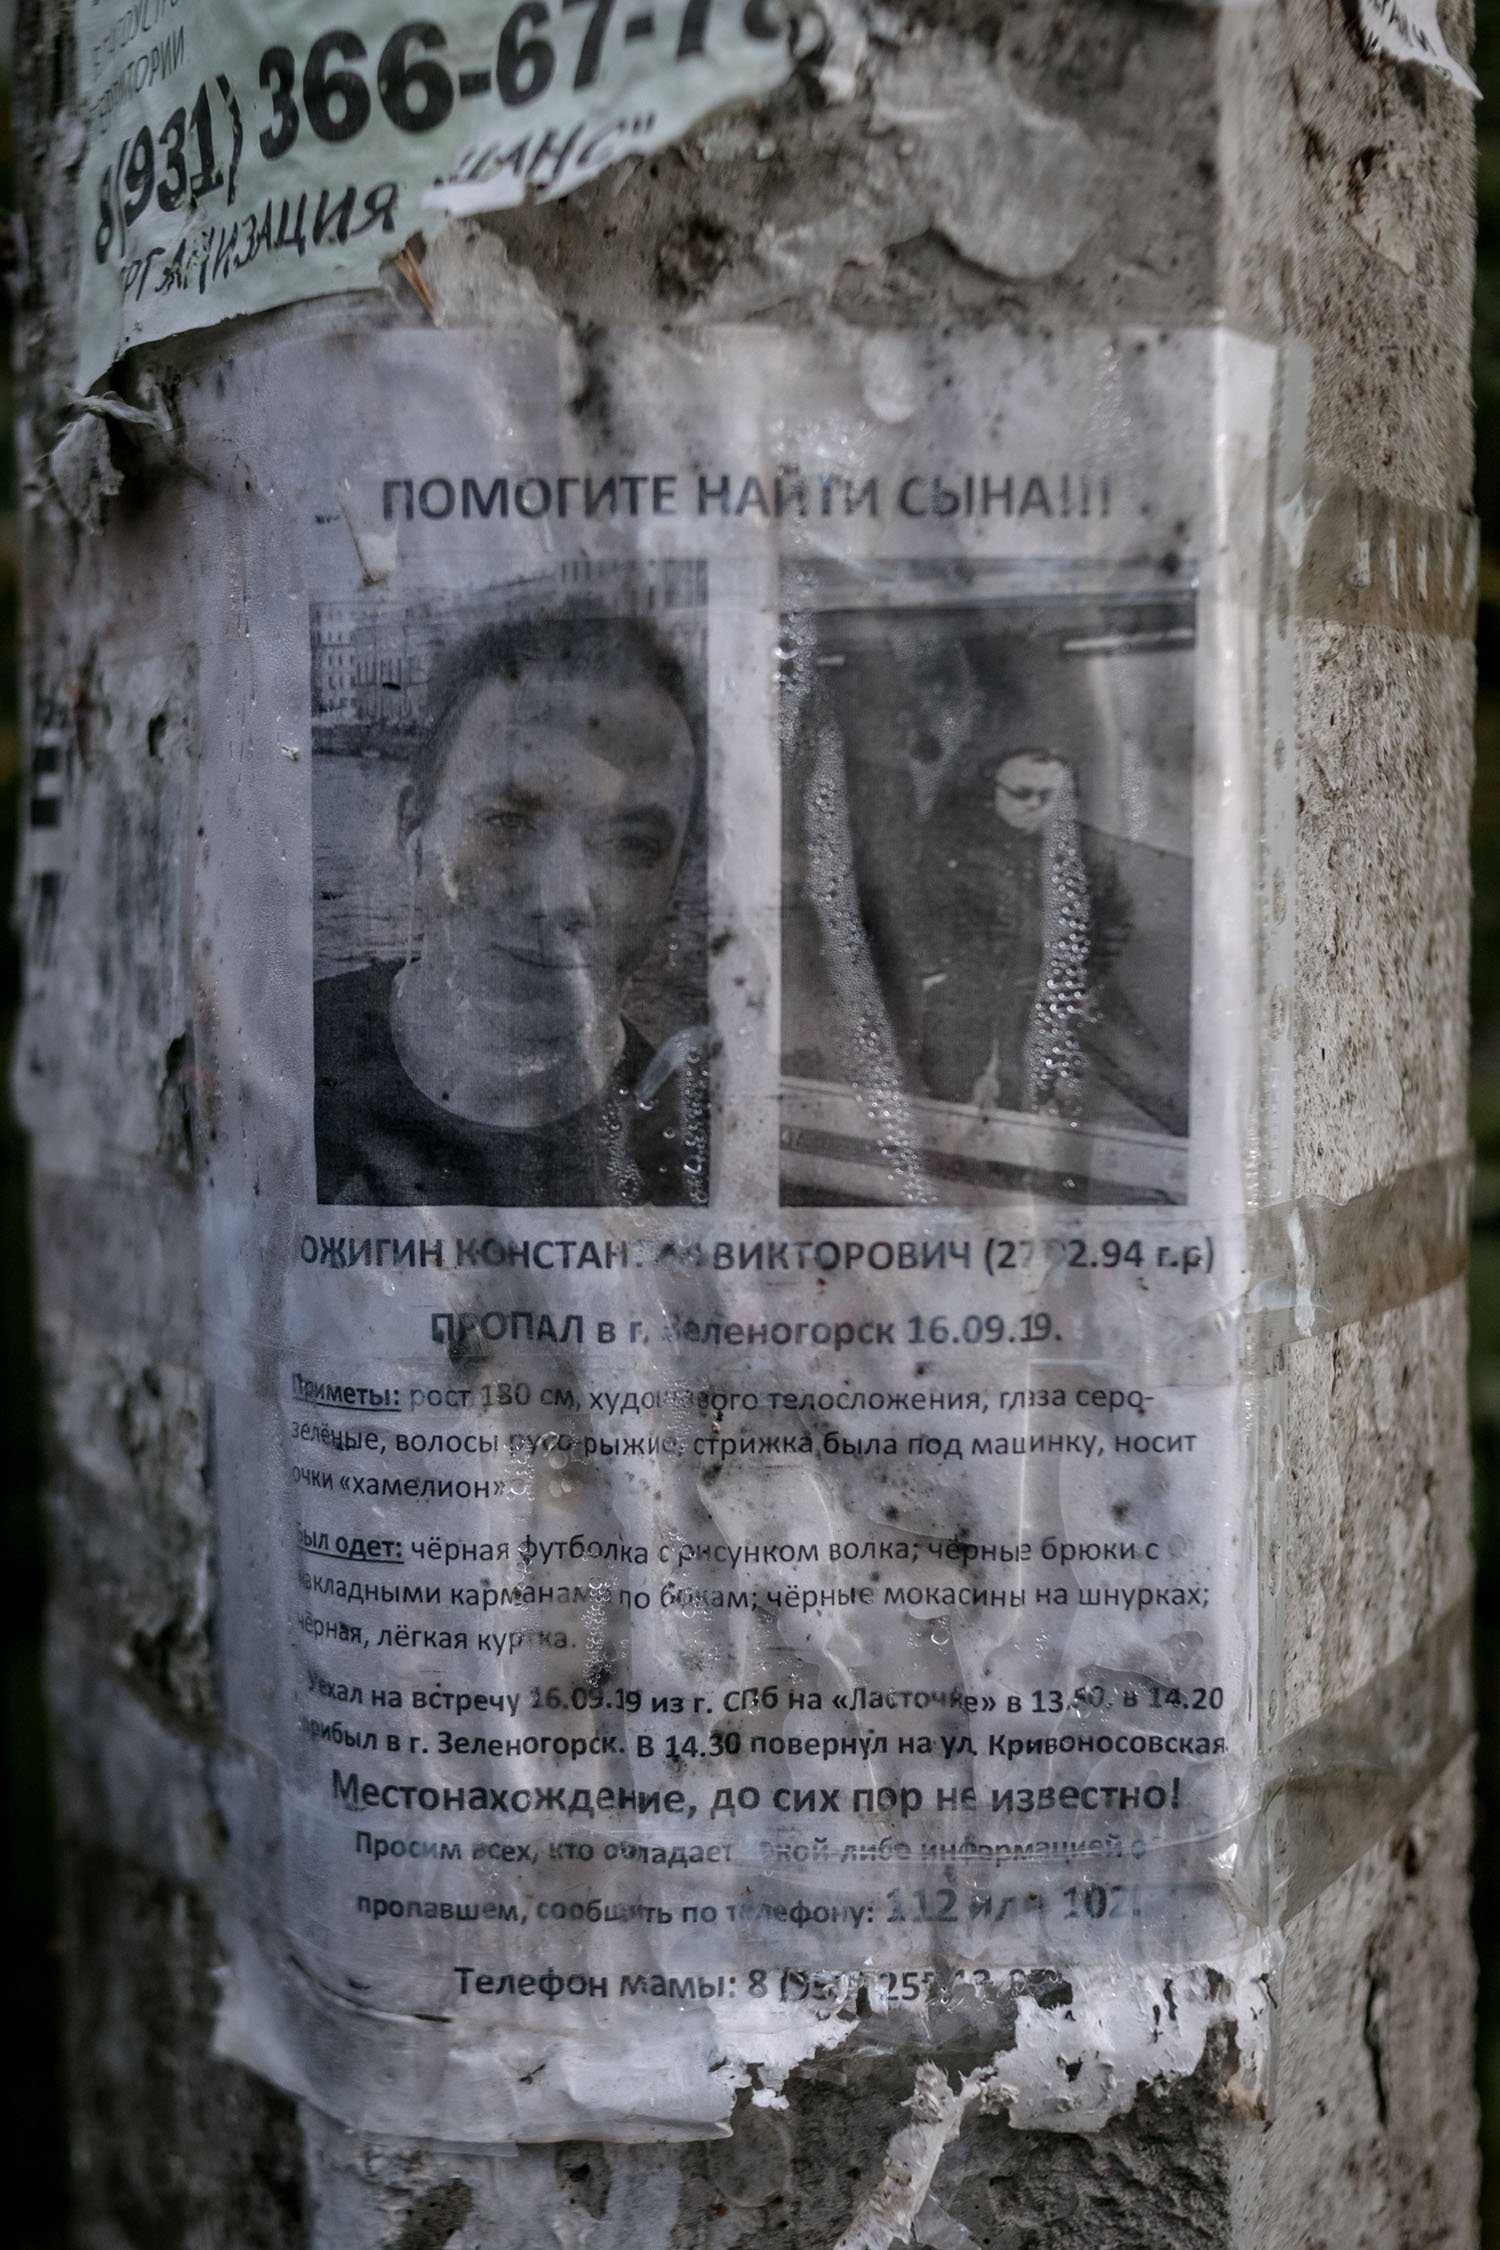 Poster printed by relatives of the missing teenager. The search continues in Zelenogorsk for more than a year.